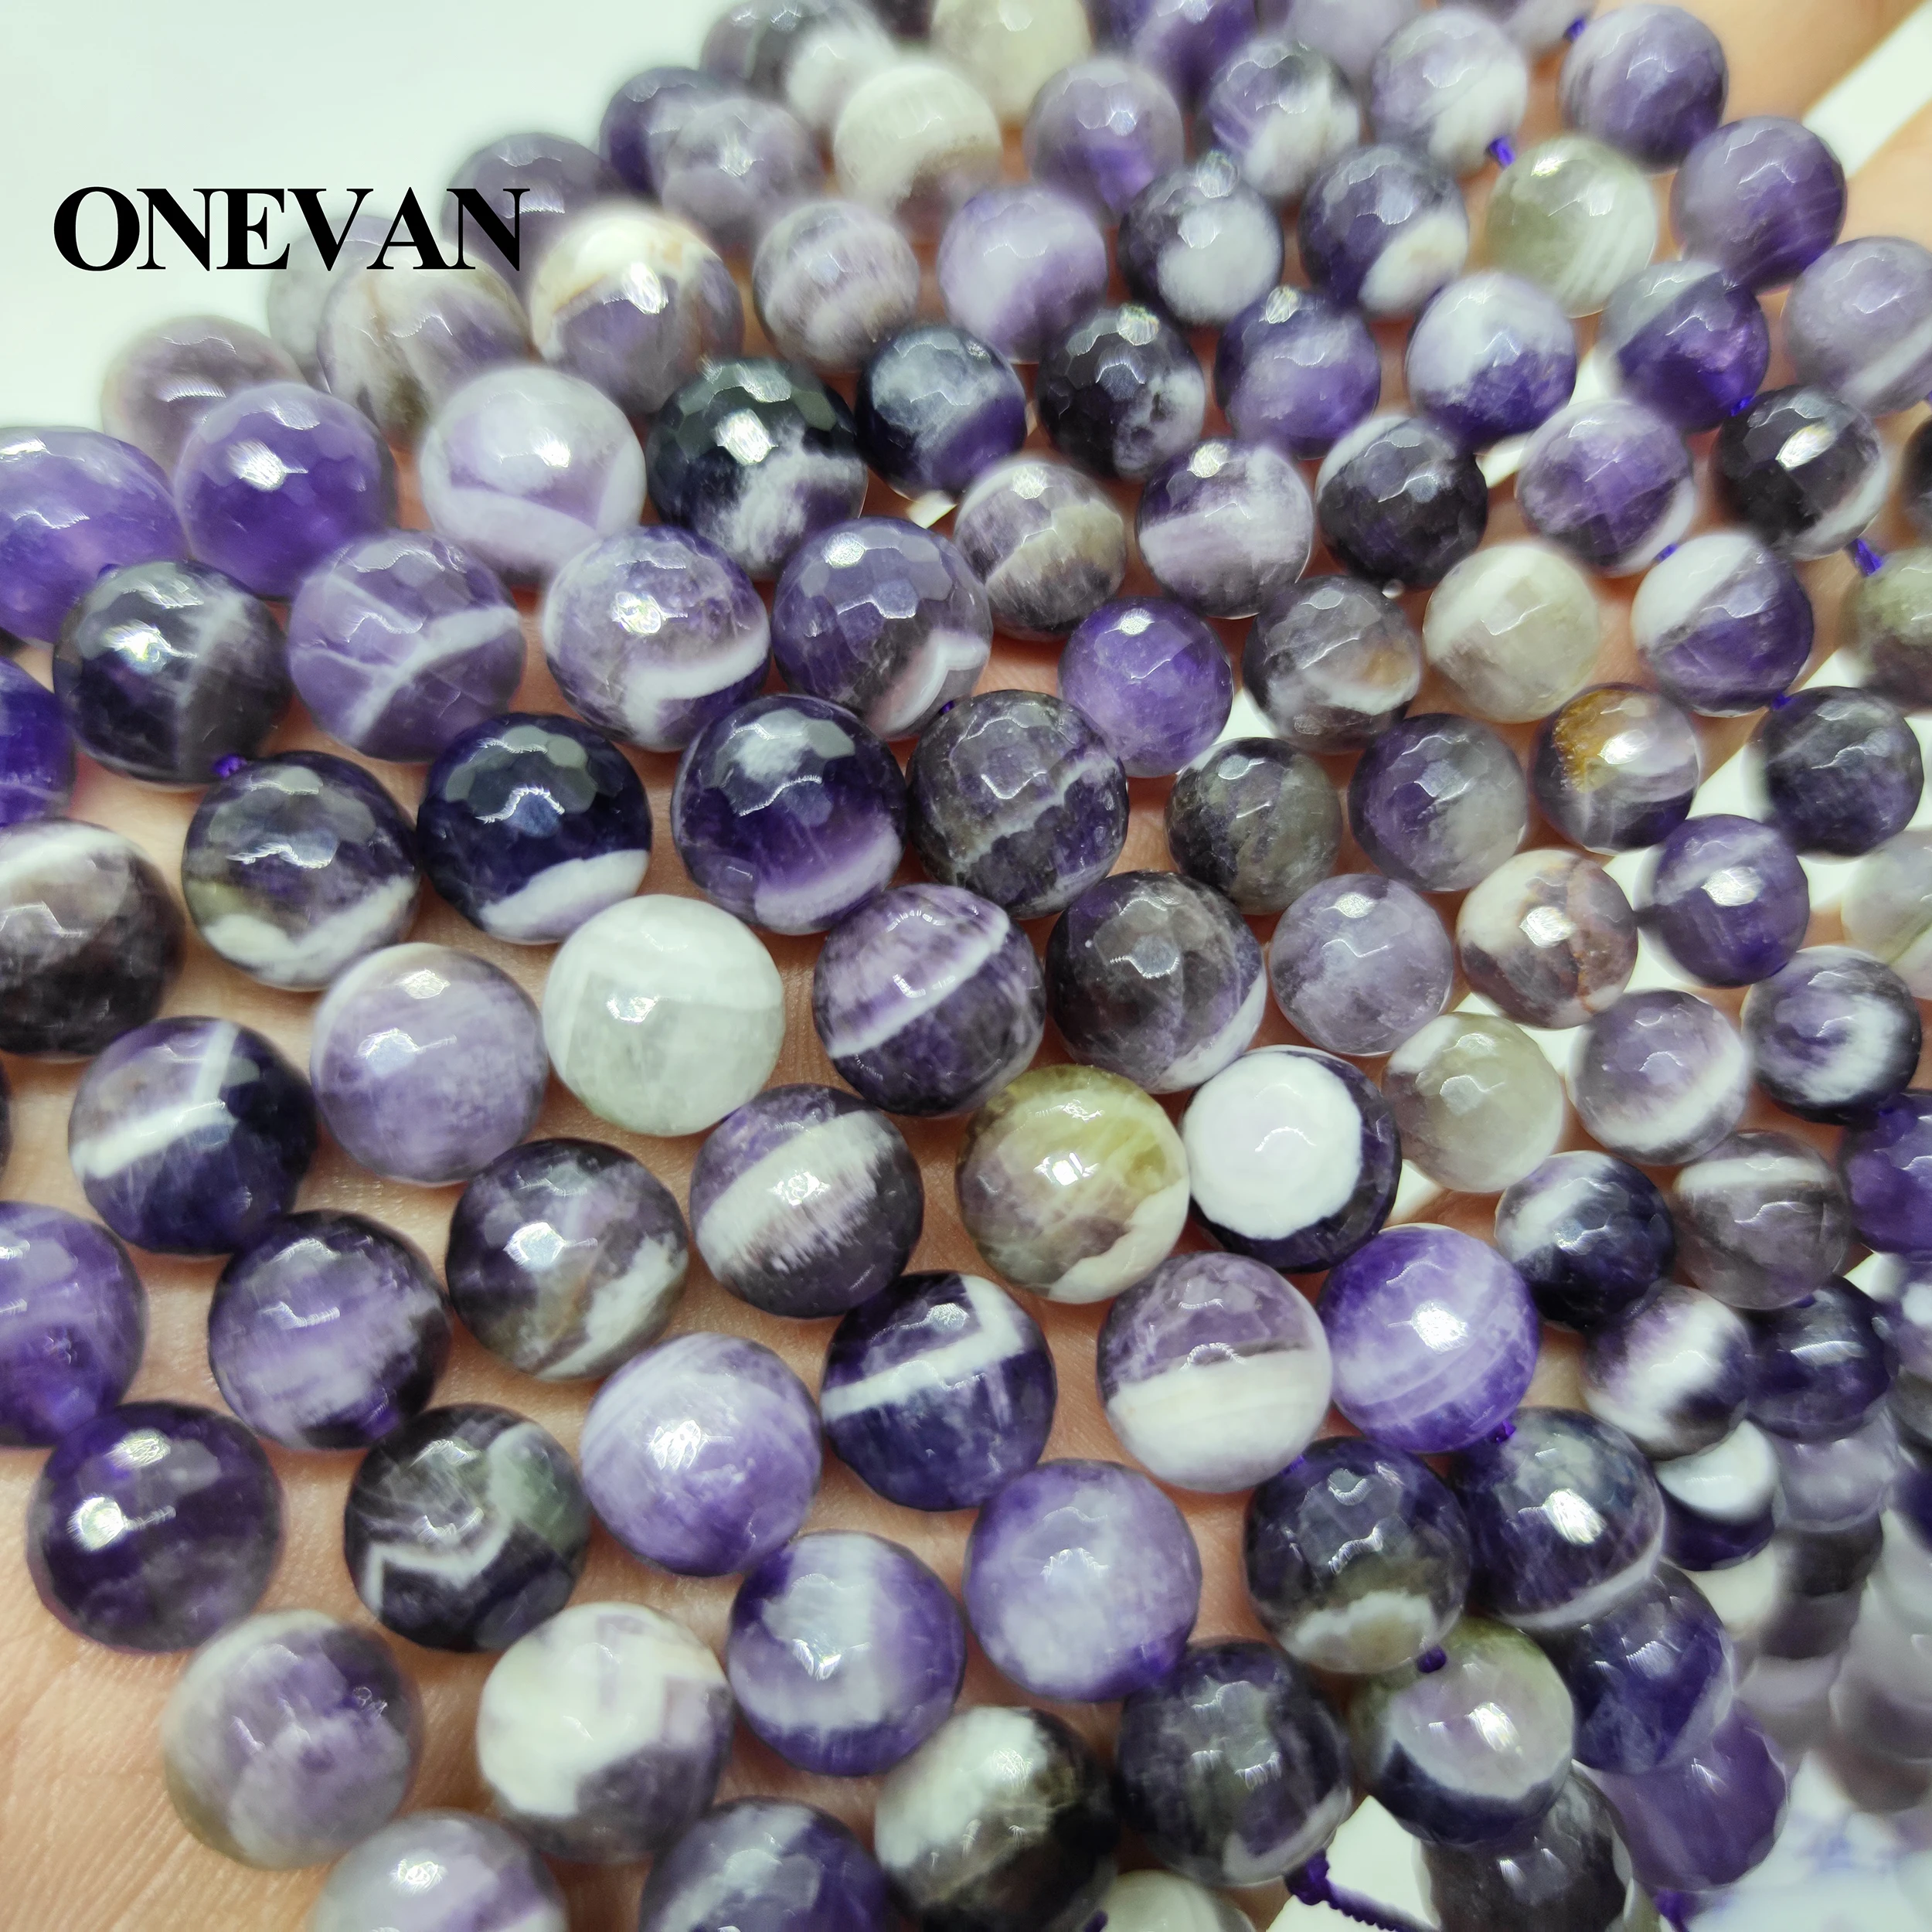 

ONEVAN Natural 8mm 9.7mm Dogteeth Amethyst Quartz Faceted Round Stone Charm Beads Bracelet Necklace Jewelry Making Diy Gift